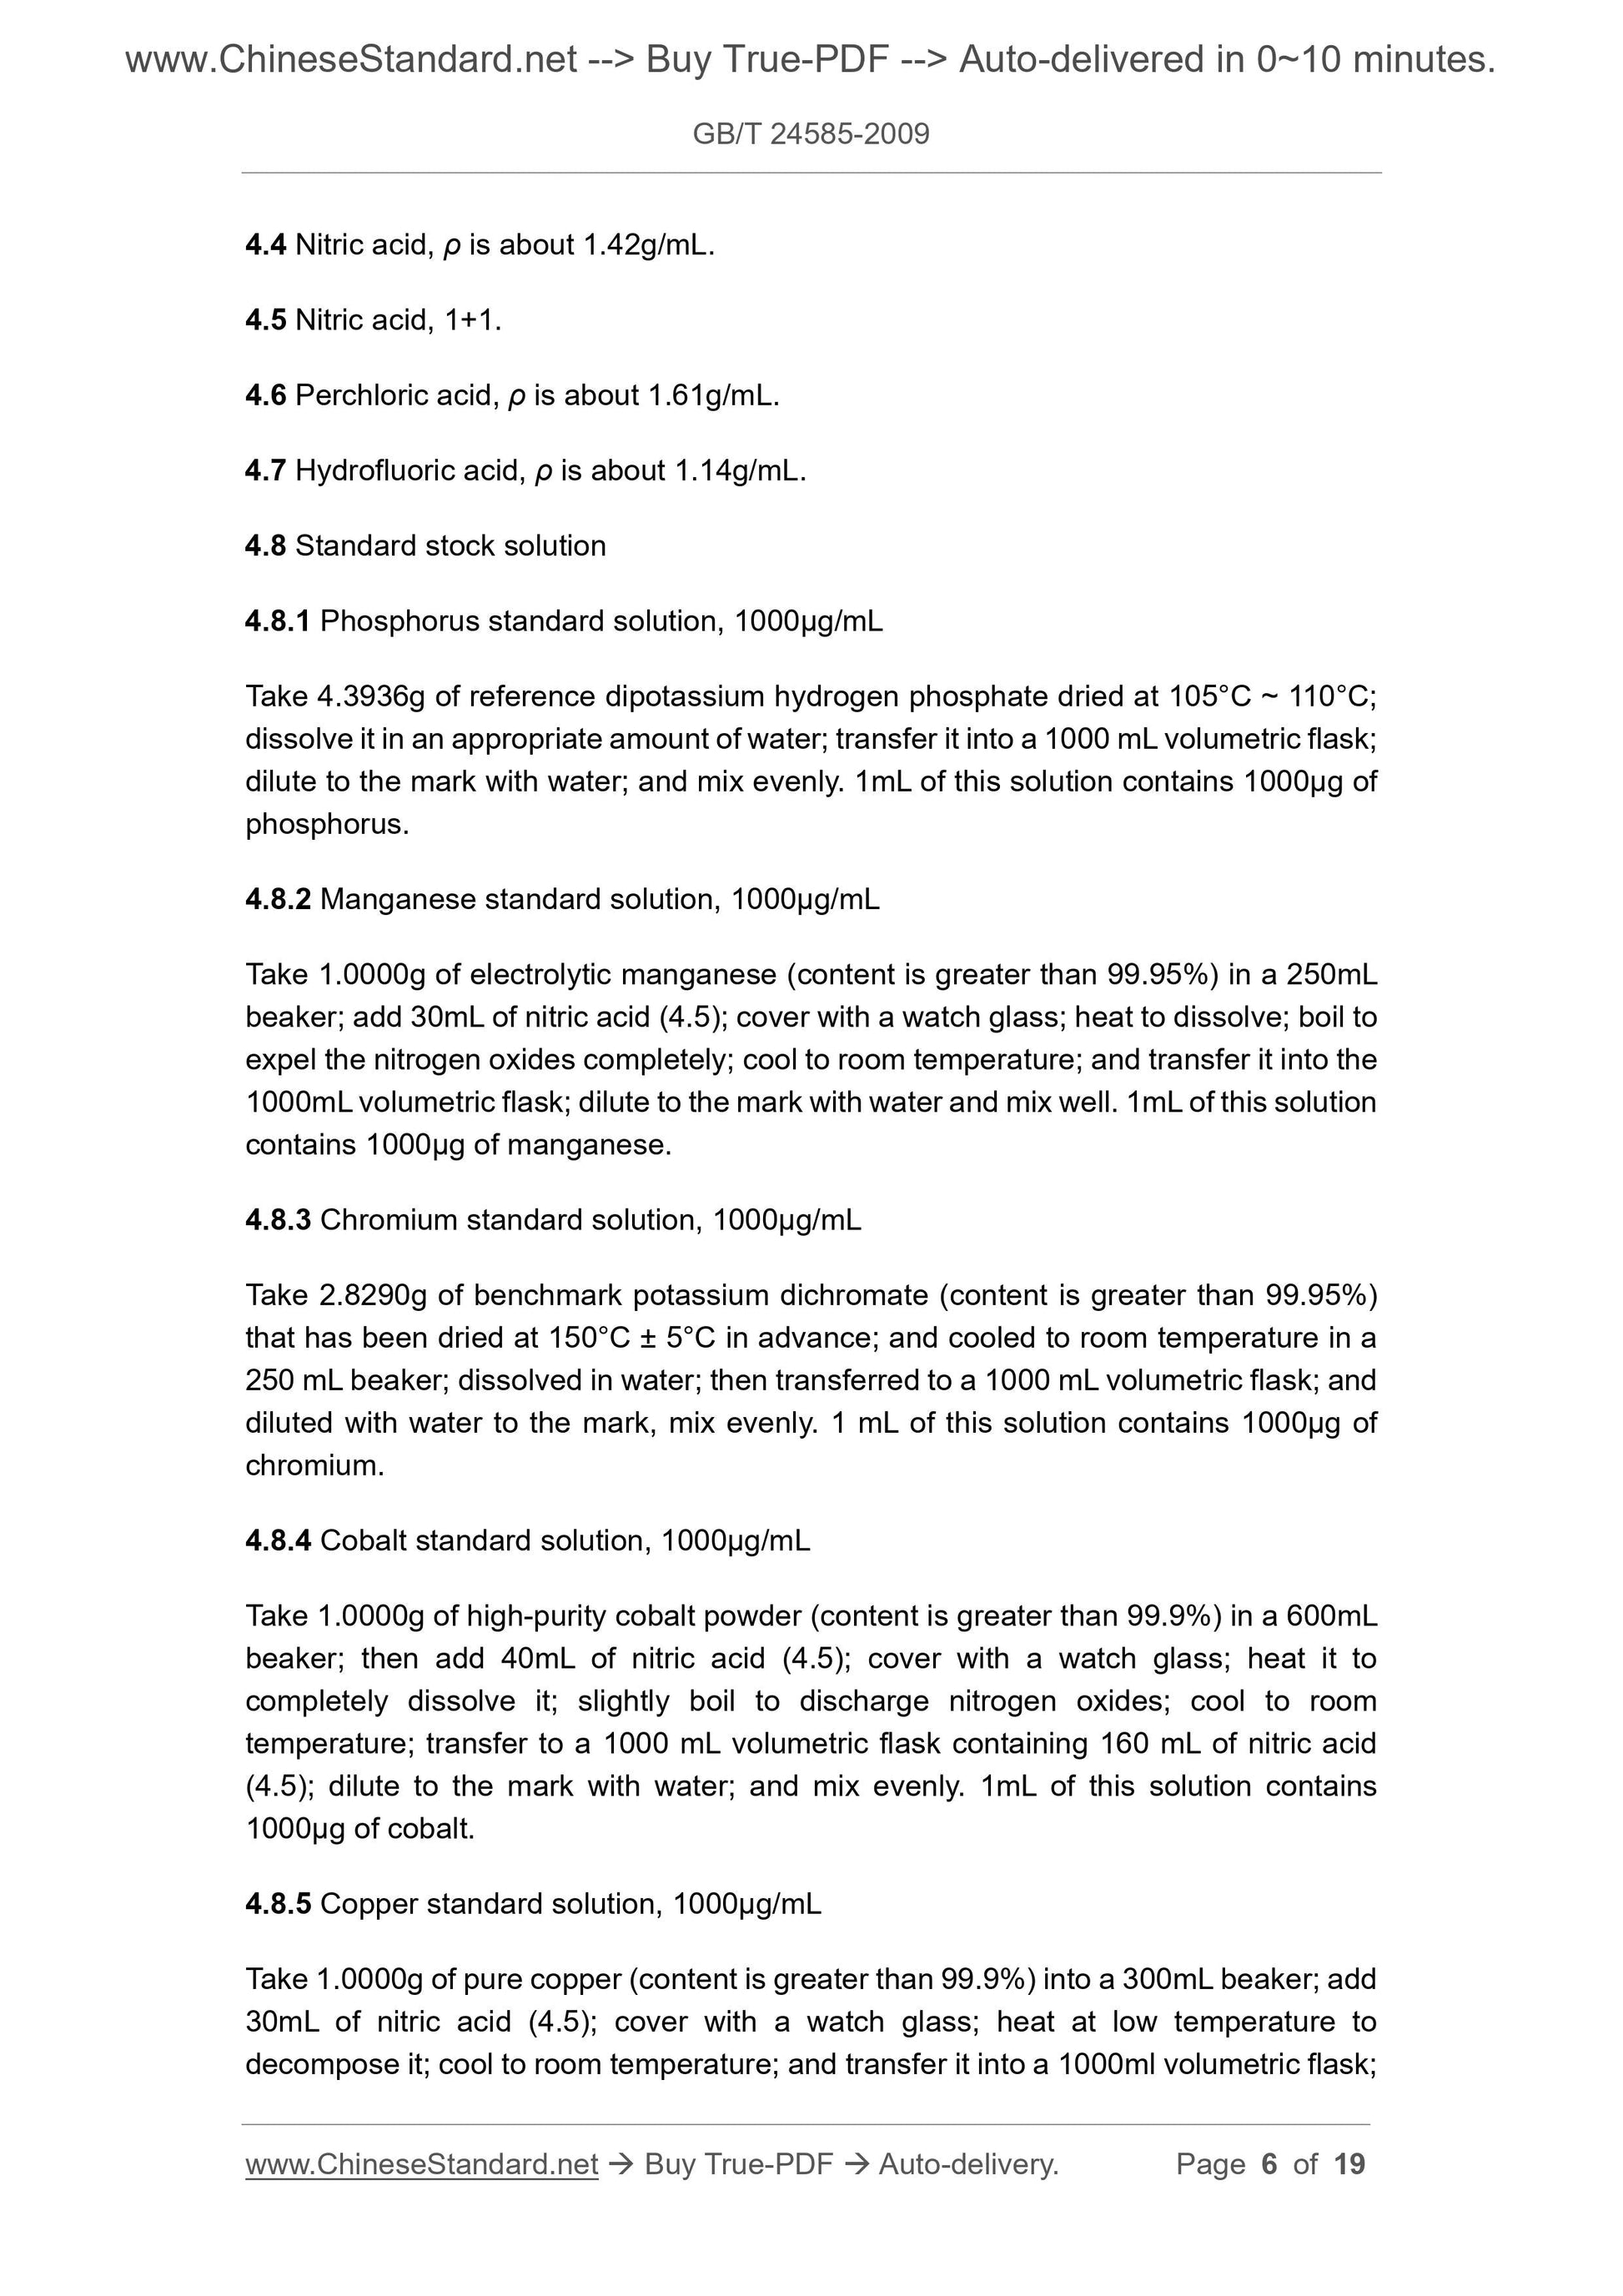 GB/T 24585-2009 Page 4